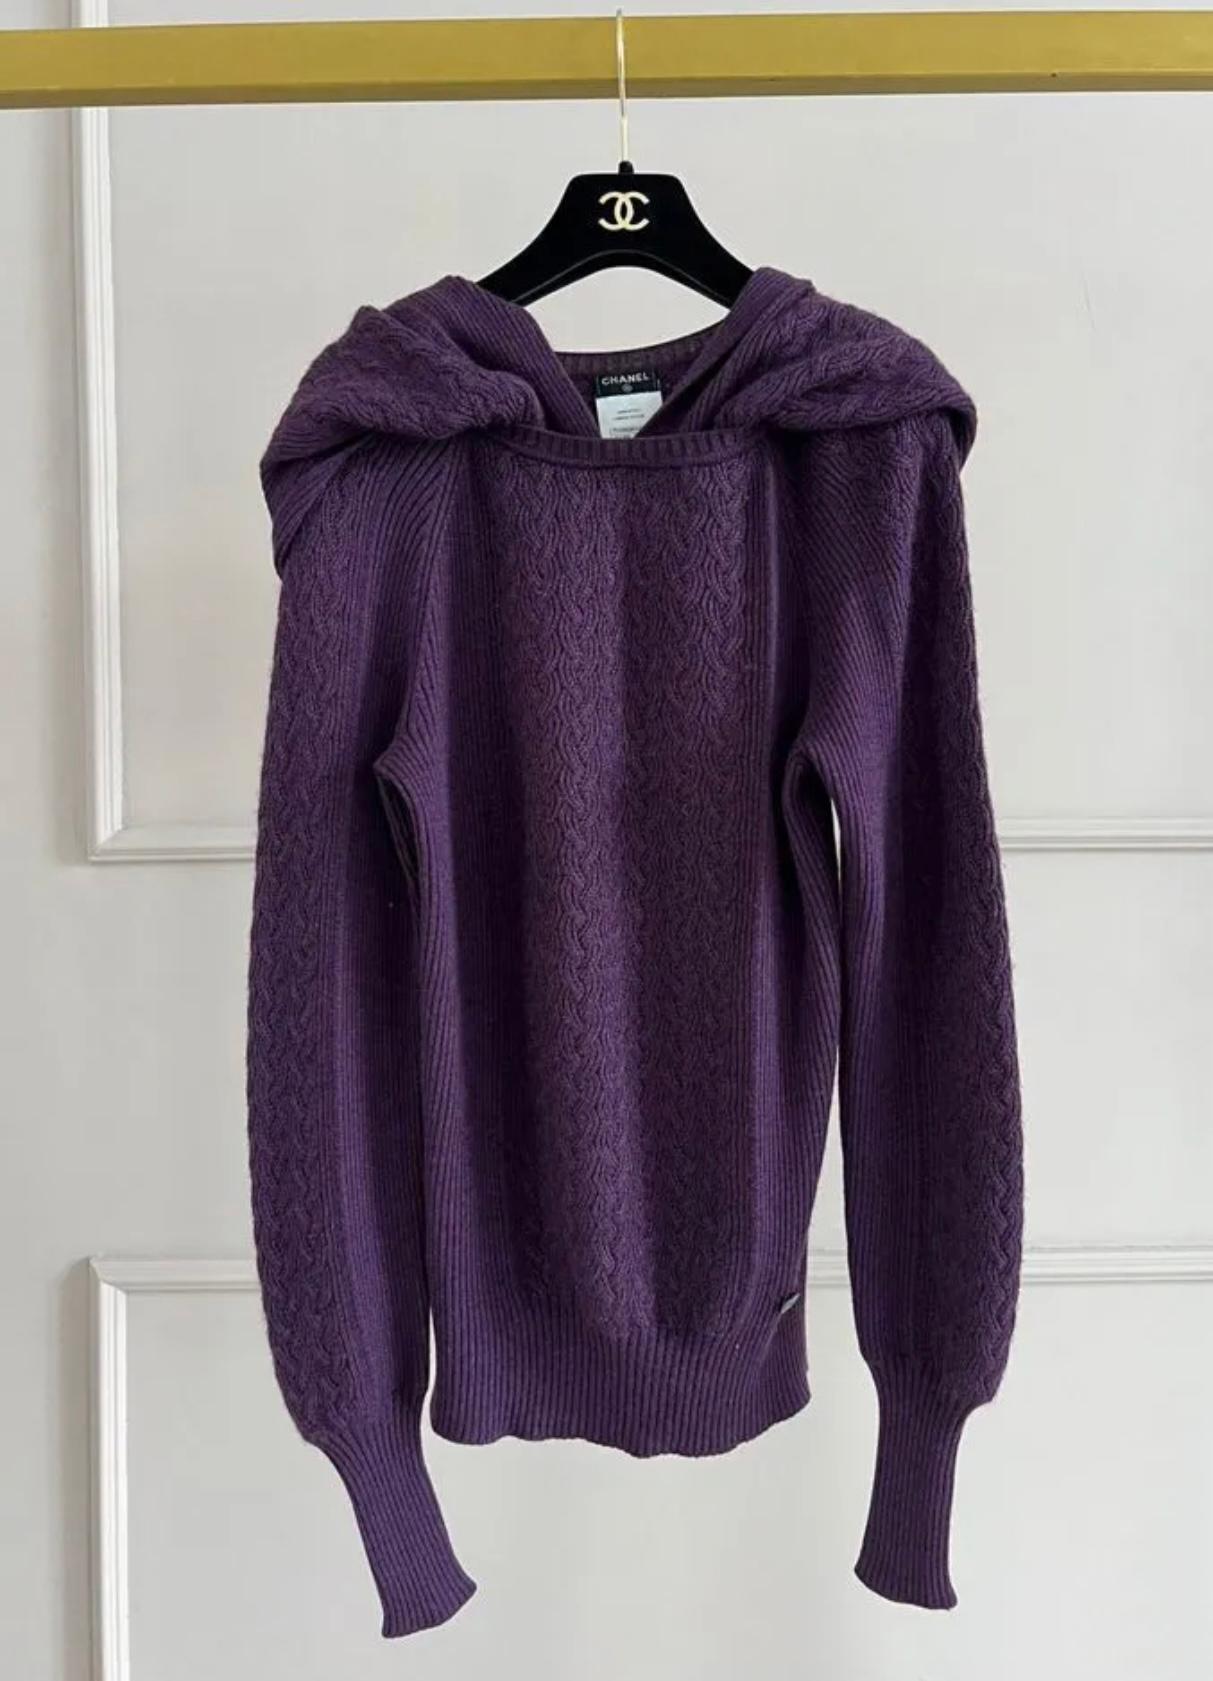 Pure cashmere jumper with snood.
- CC logo charm at waist
Size mark 38 FR. Condition of a new thing.